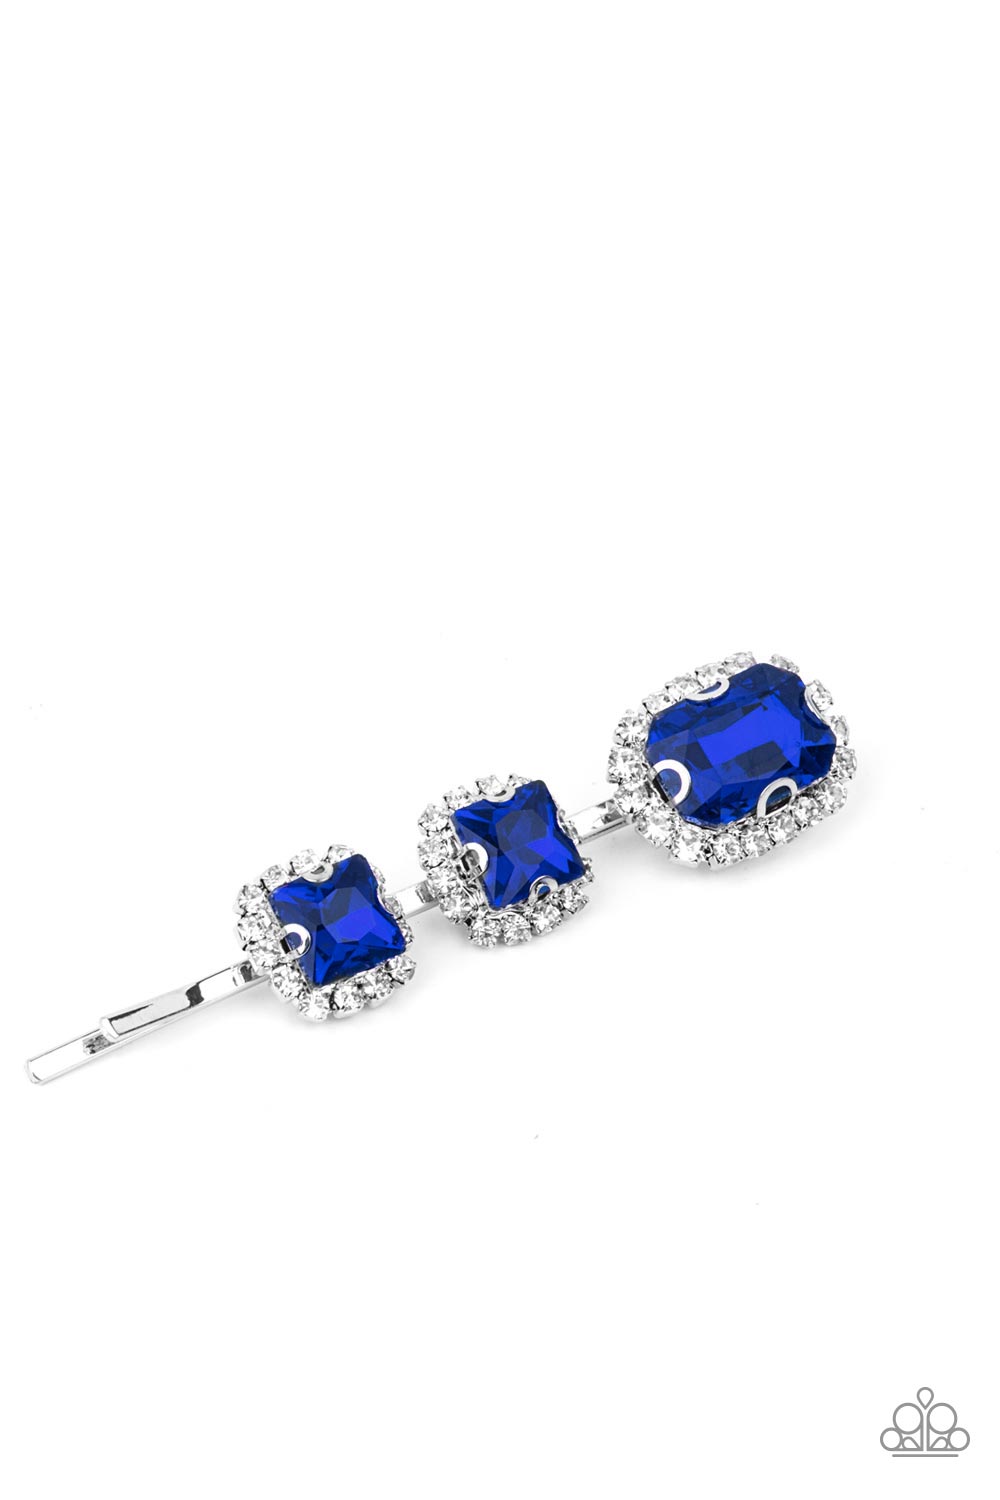 Bordered in rings of glassy white rhinestones, a trio of blue regal cut rhinestones embellishes the front of a classic silver bobby pin.  Sold as one individual decorative bobby pin hair clip.